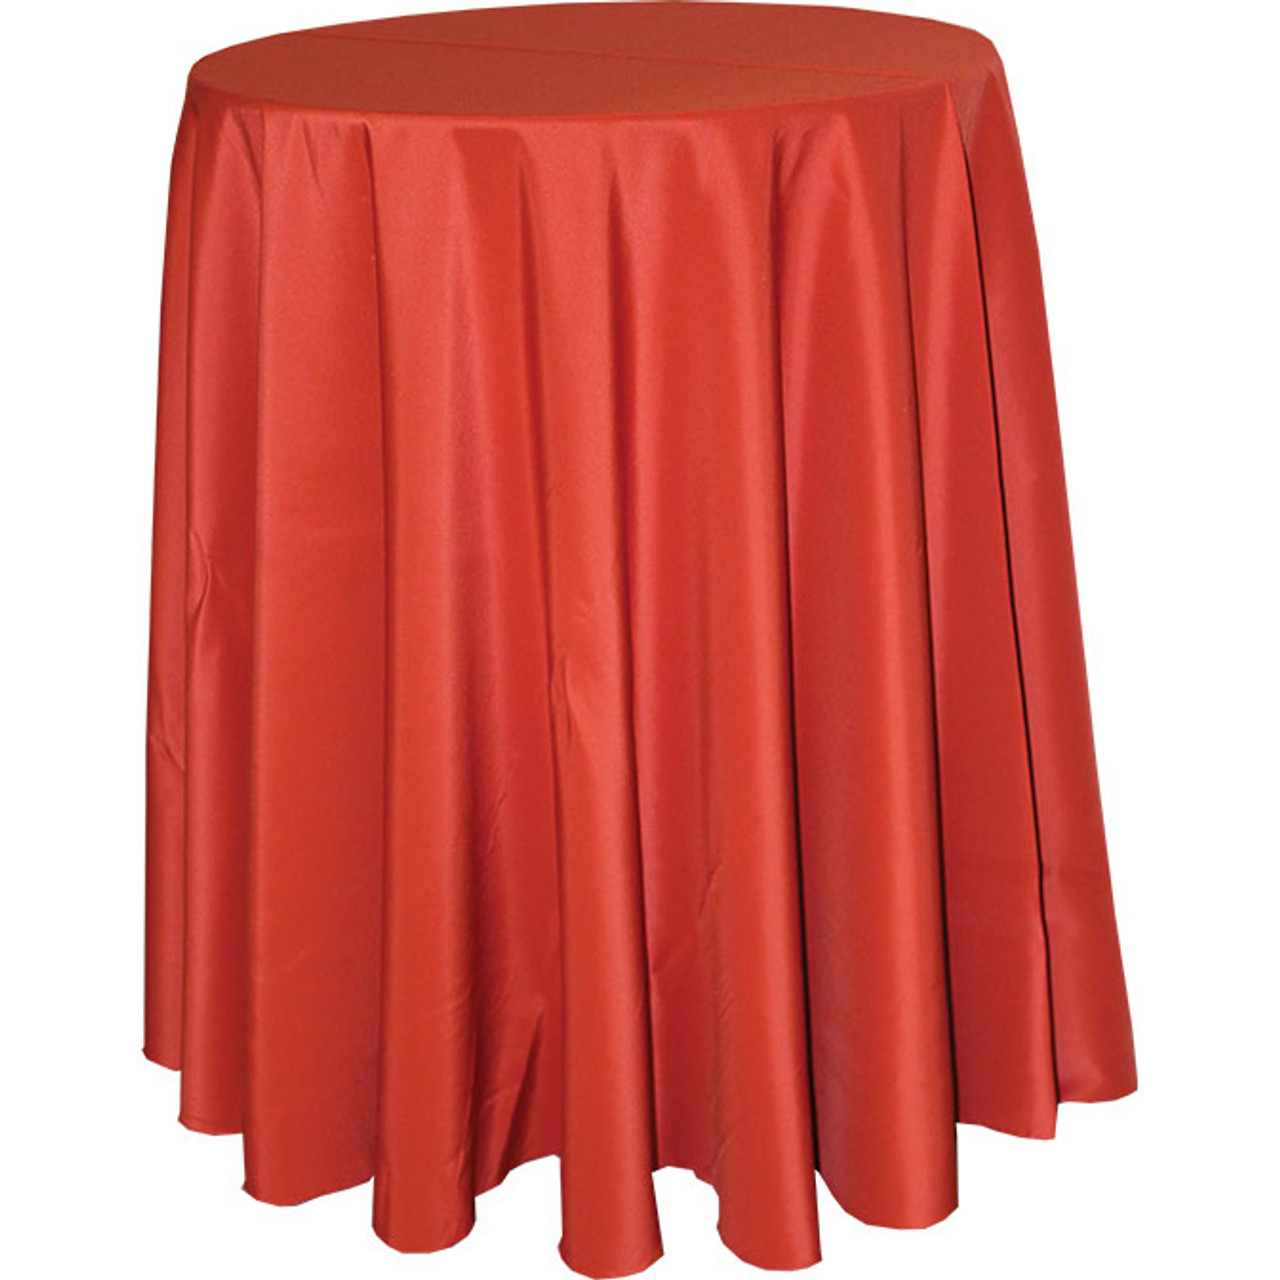 108" Round Polyester Tablecloth